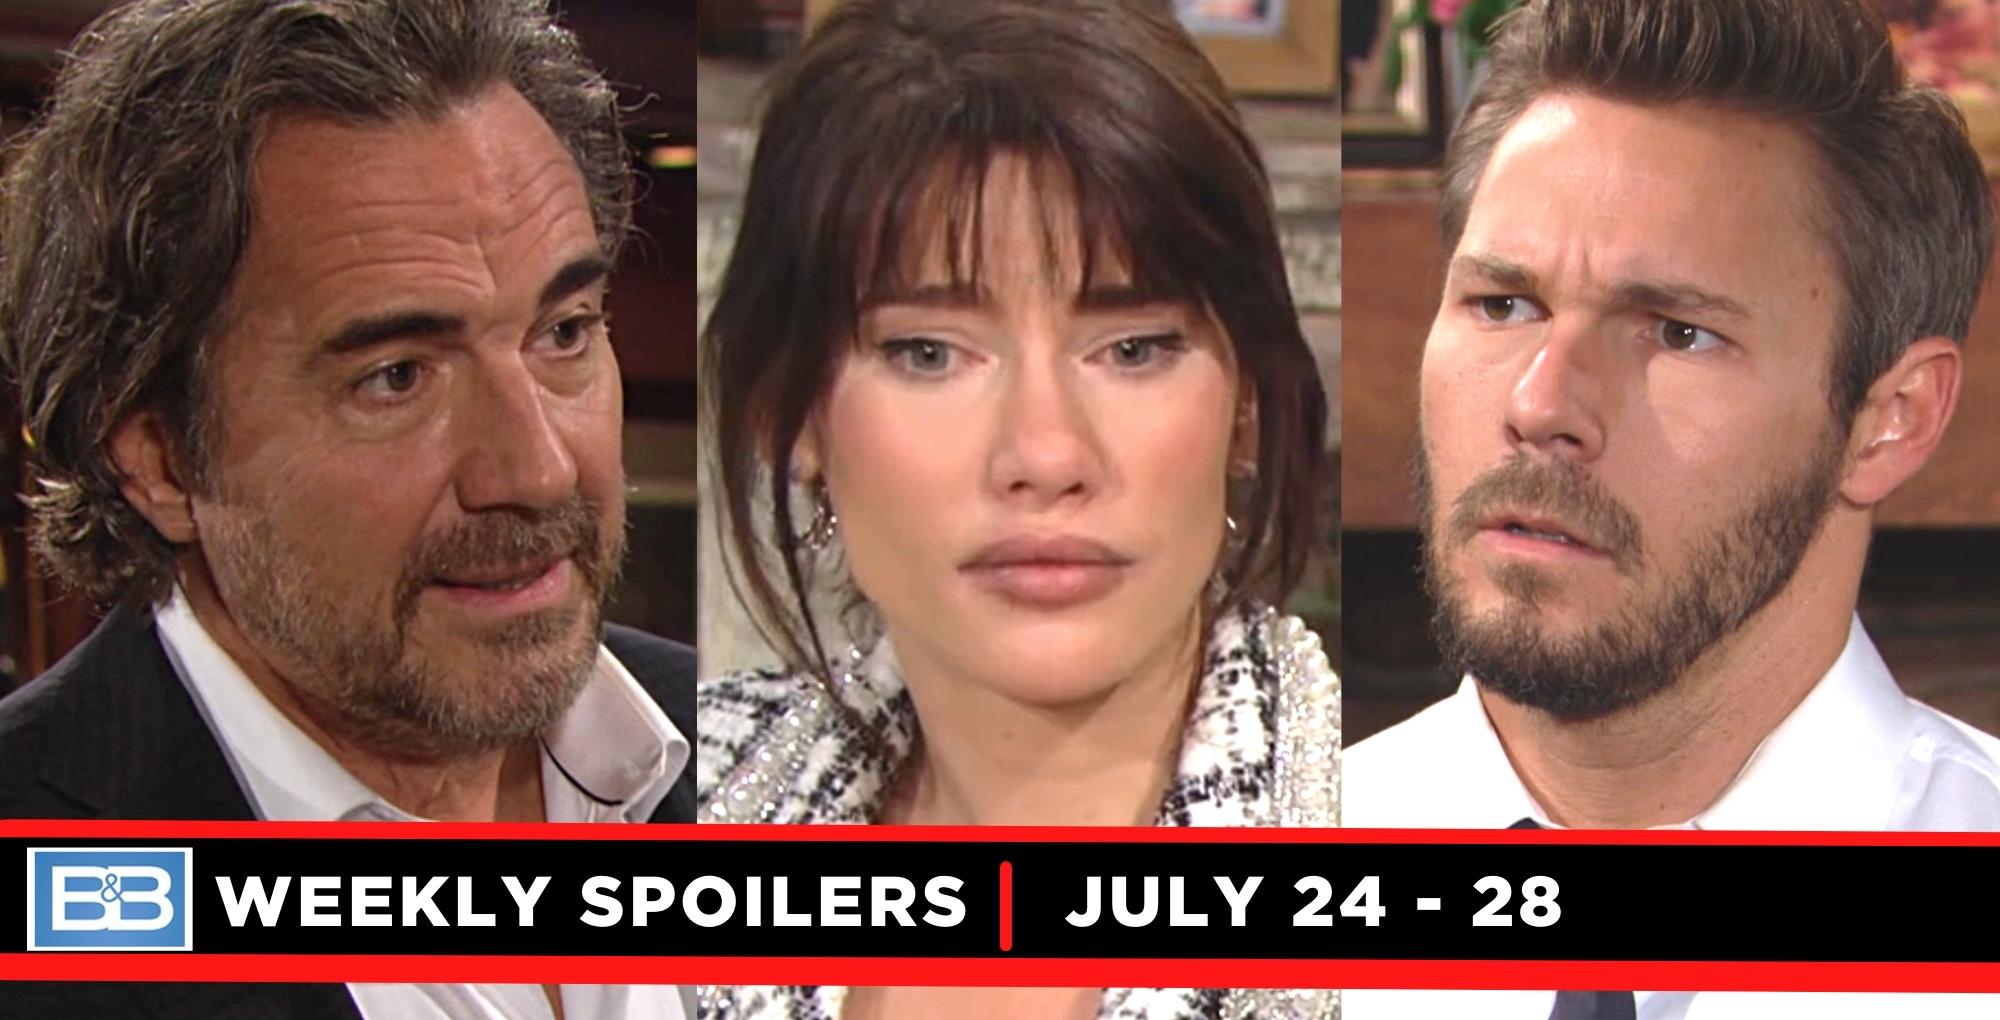 the bold and the beautiful spoilers for july 24 – july 28, 2023, three images ridge, steffy, and liam.